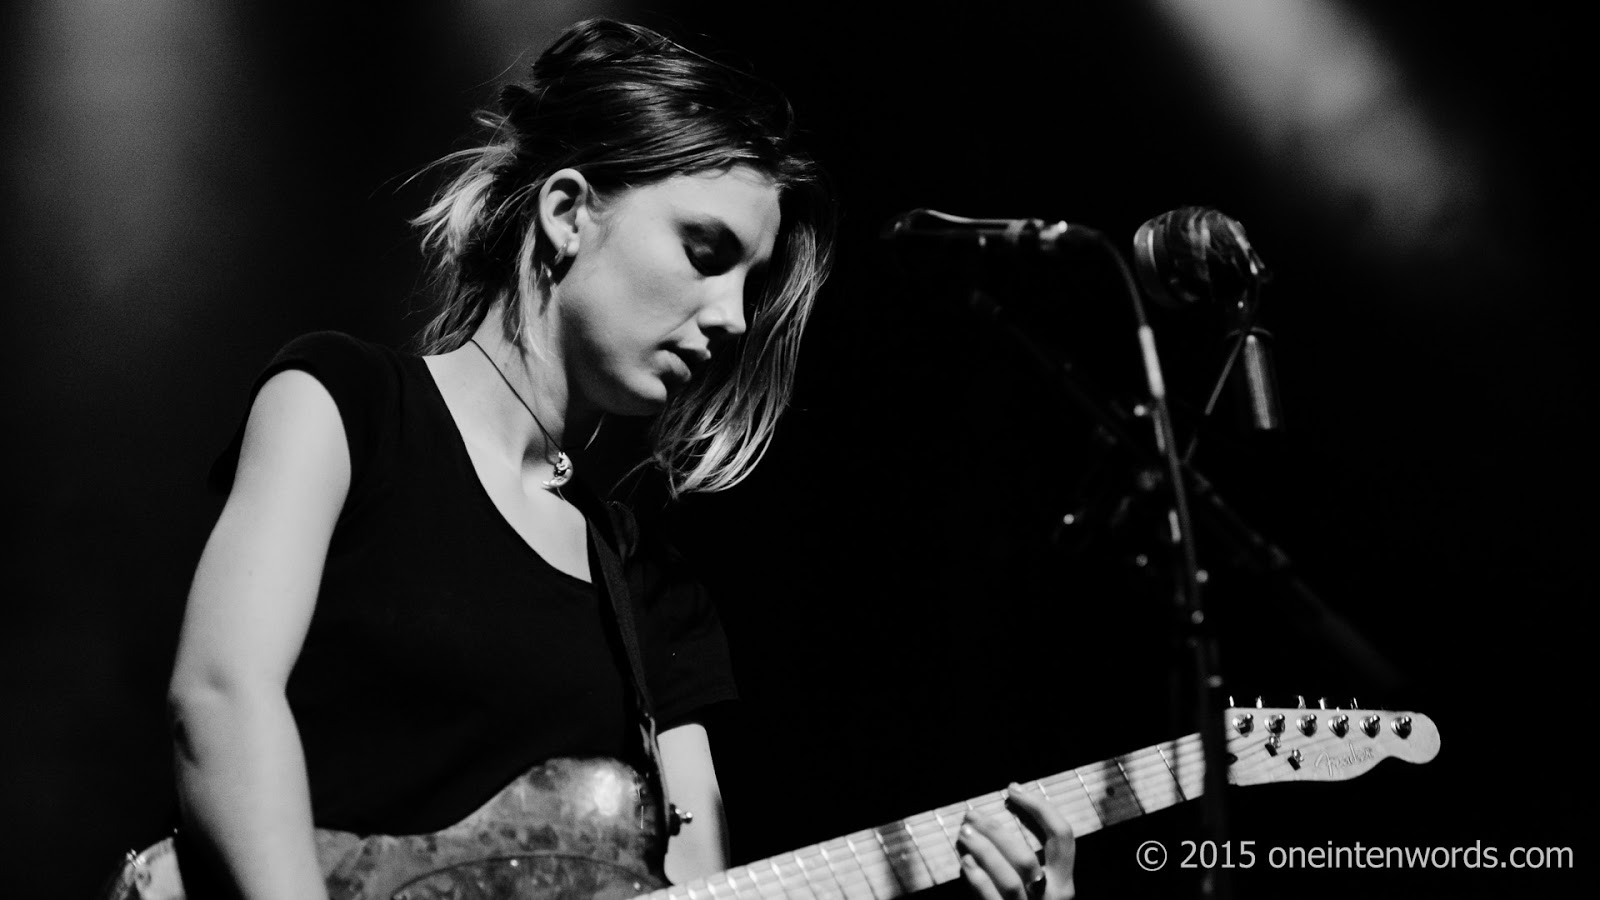 one in ten words: New video for Lisbon from Wolf Alice and My Love